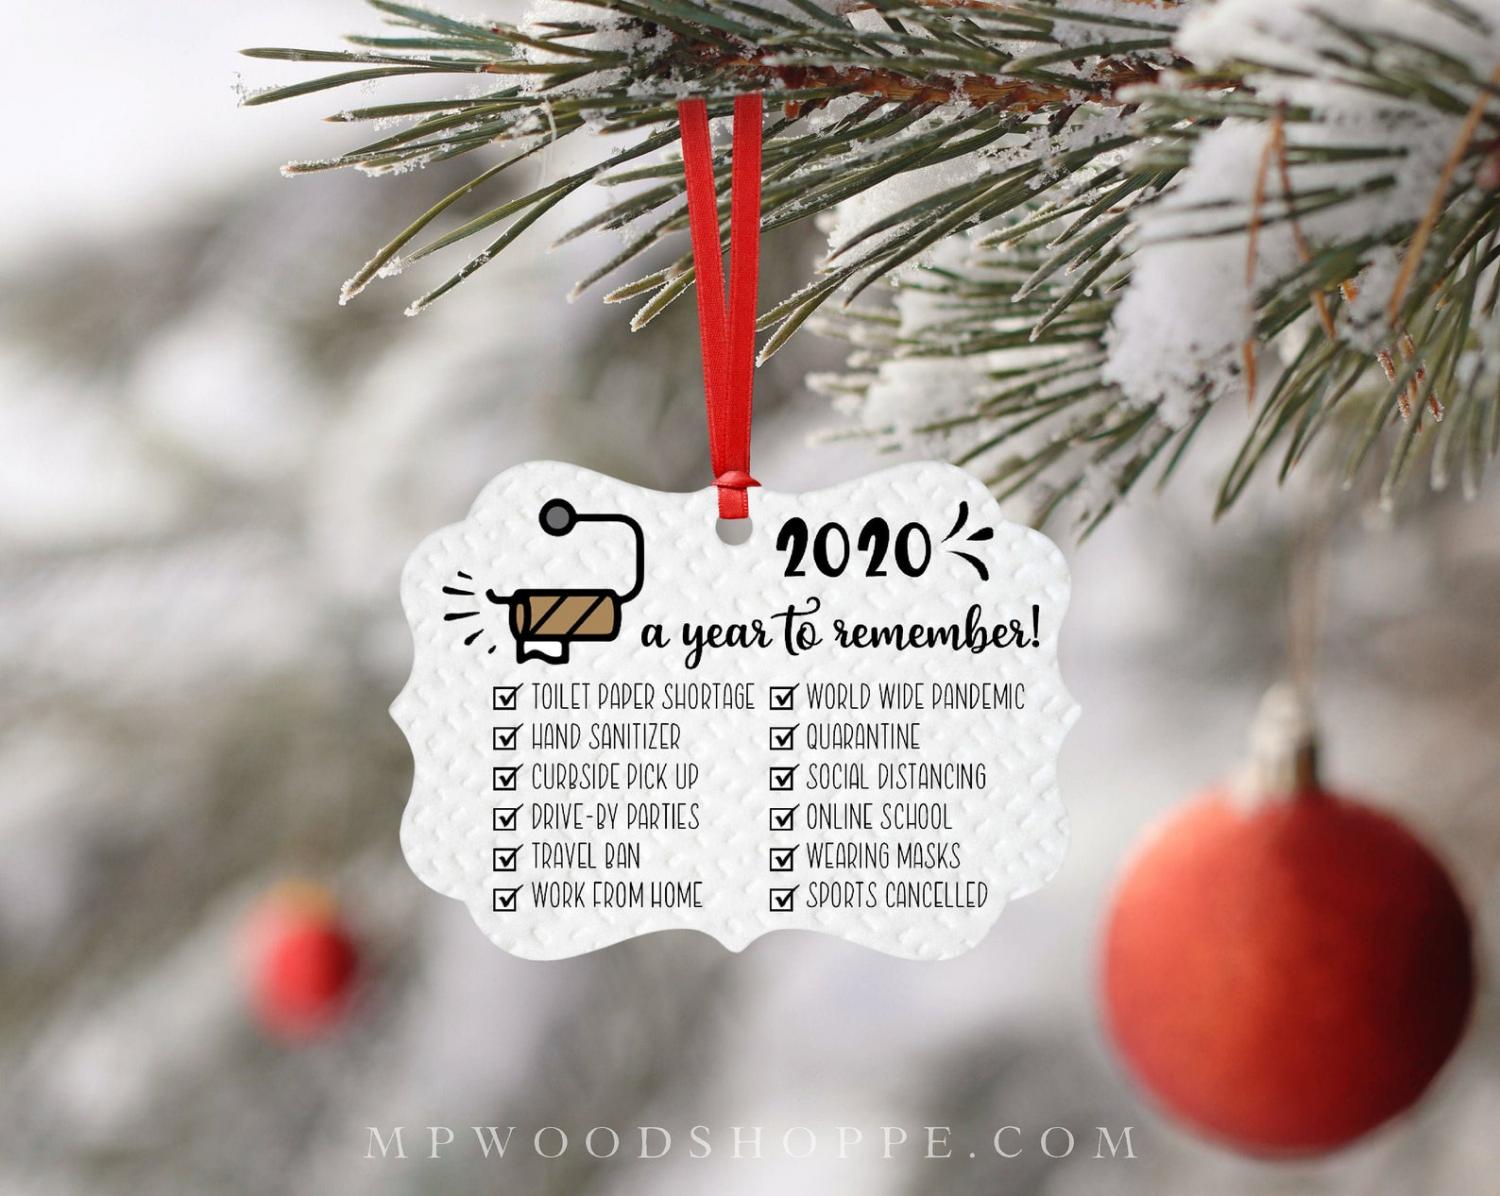 2020 A Year To Remember - Funny List of Disasters From 2020 Christmas Ornament